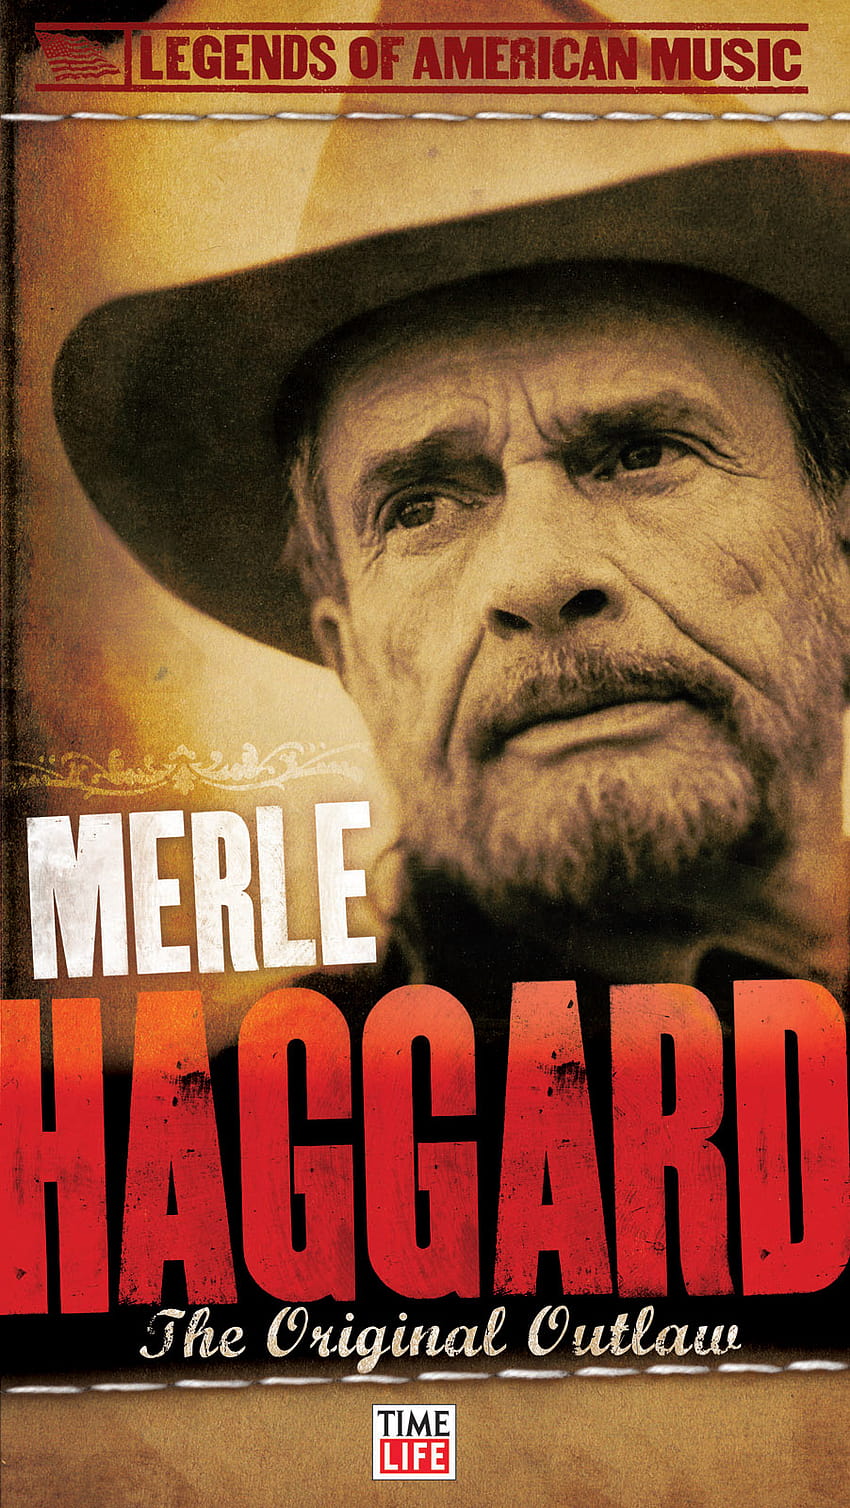 Merle haggard box set cover [902x1600] for your , Mobile & Tablet HD ...